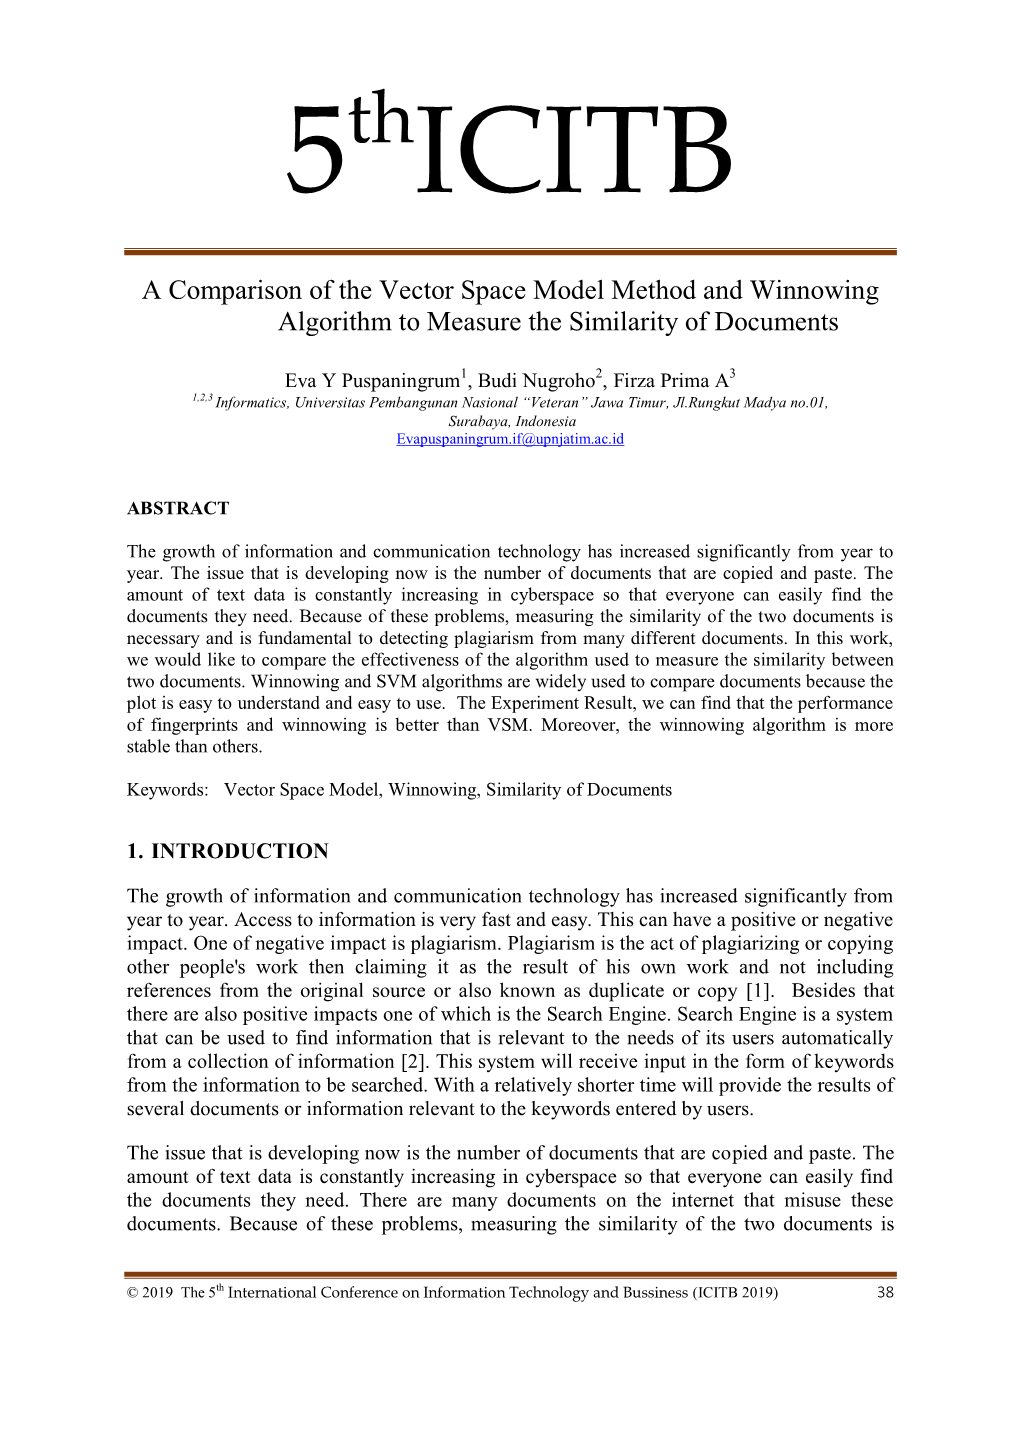 A Comparison of the Vector Space Model Method and Winnowing Algorithm to Measure the Similarity of Documents